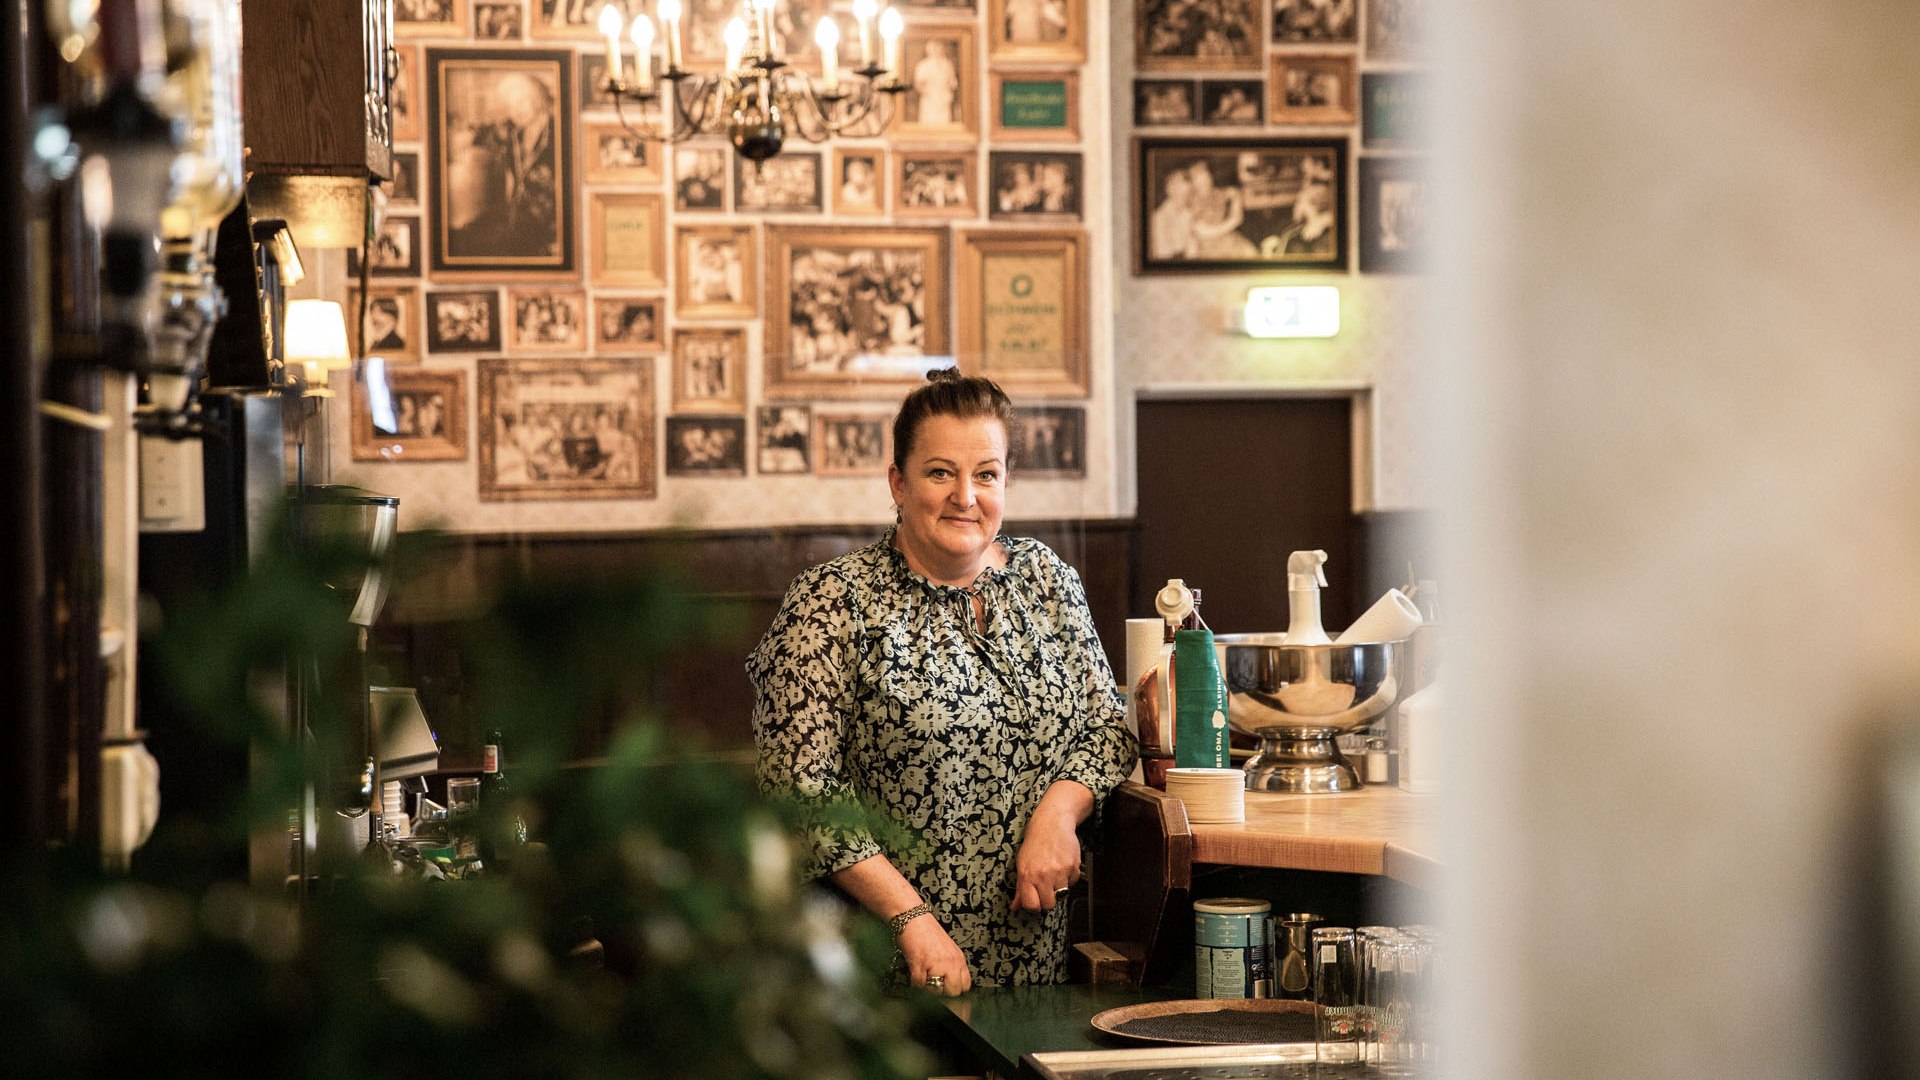 Maureen Wolf behind the counter of her restaurant in Cologne, © Holger Hage, Tourismus NRW e.V.